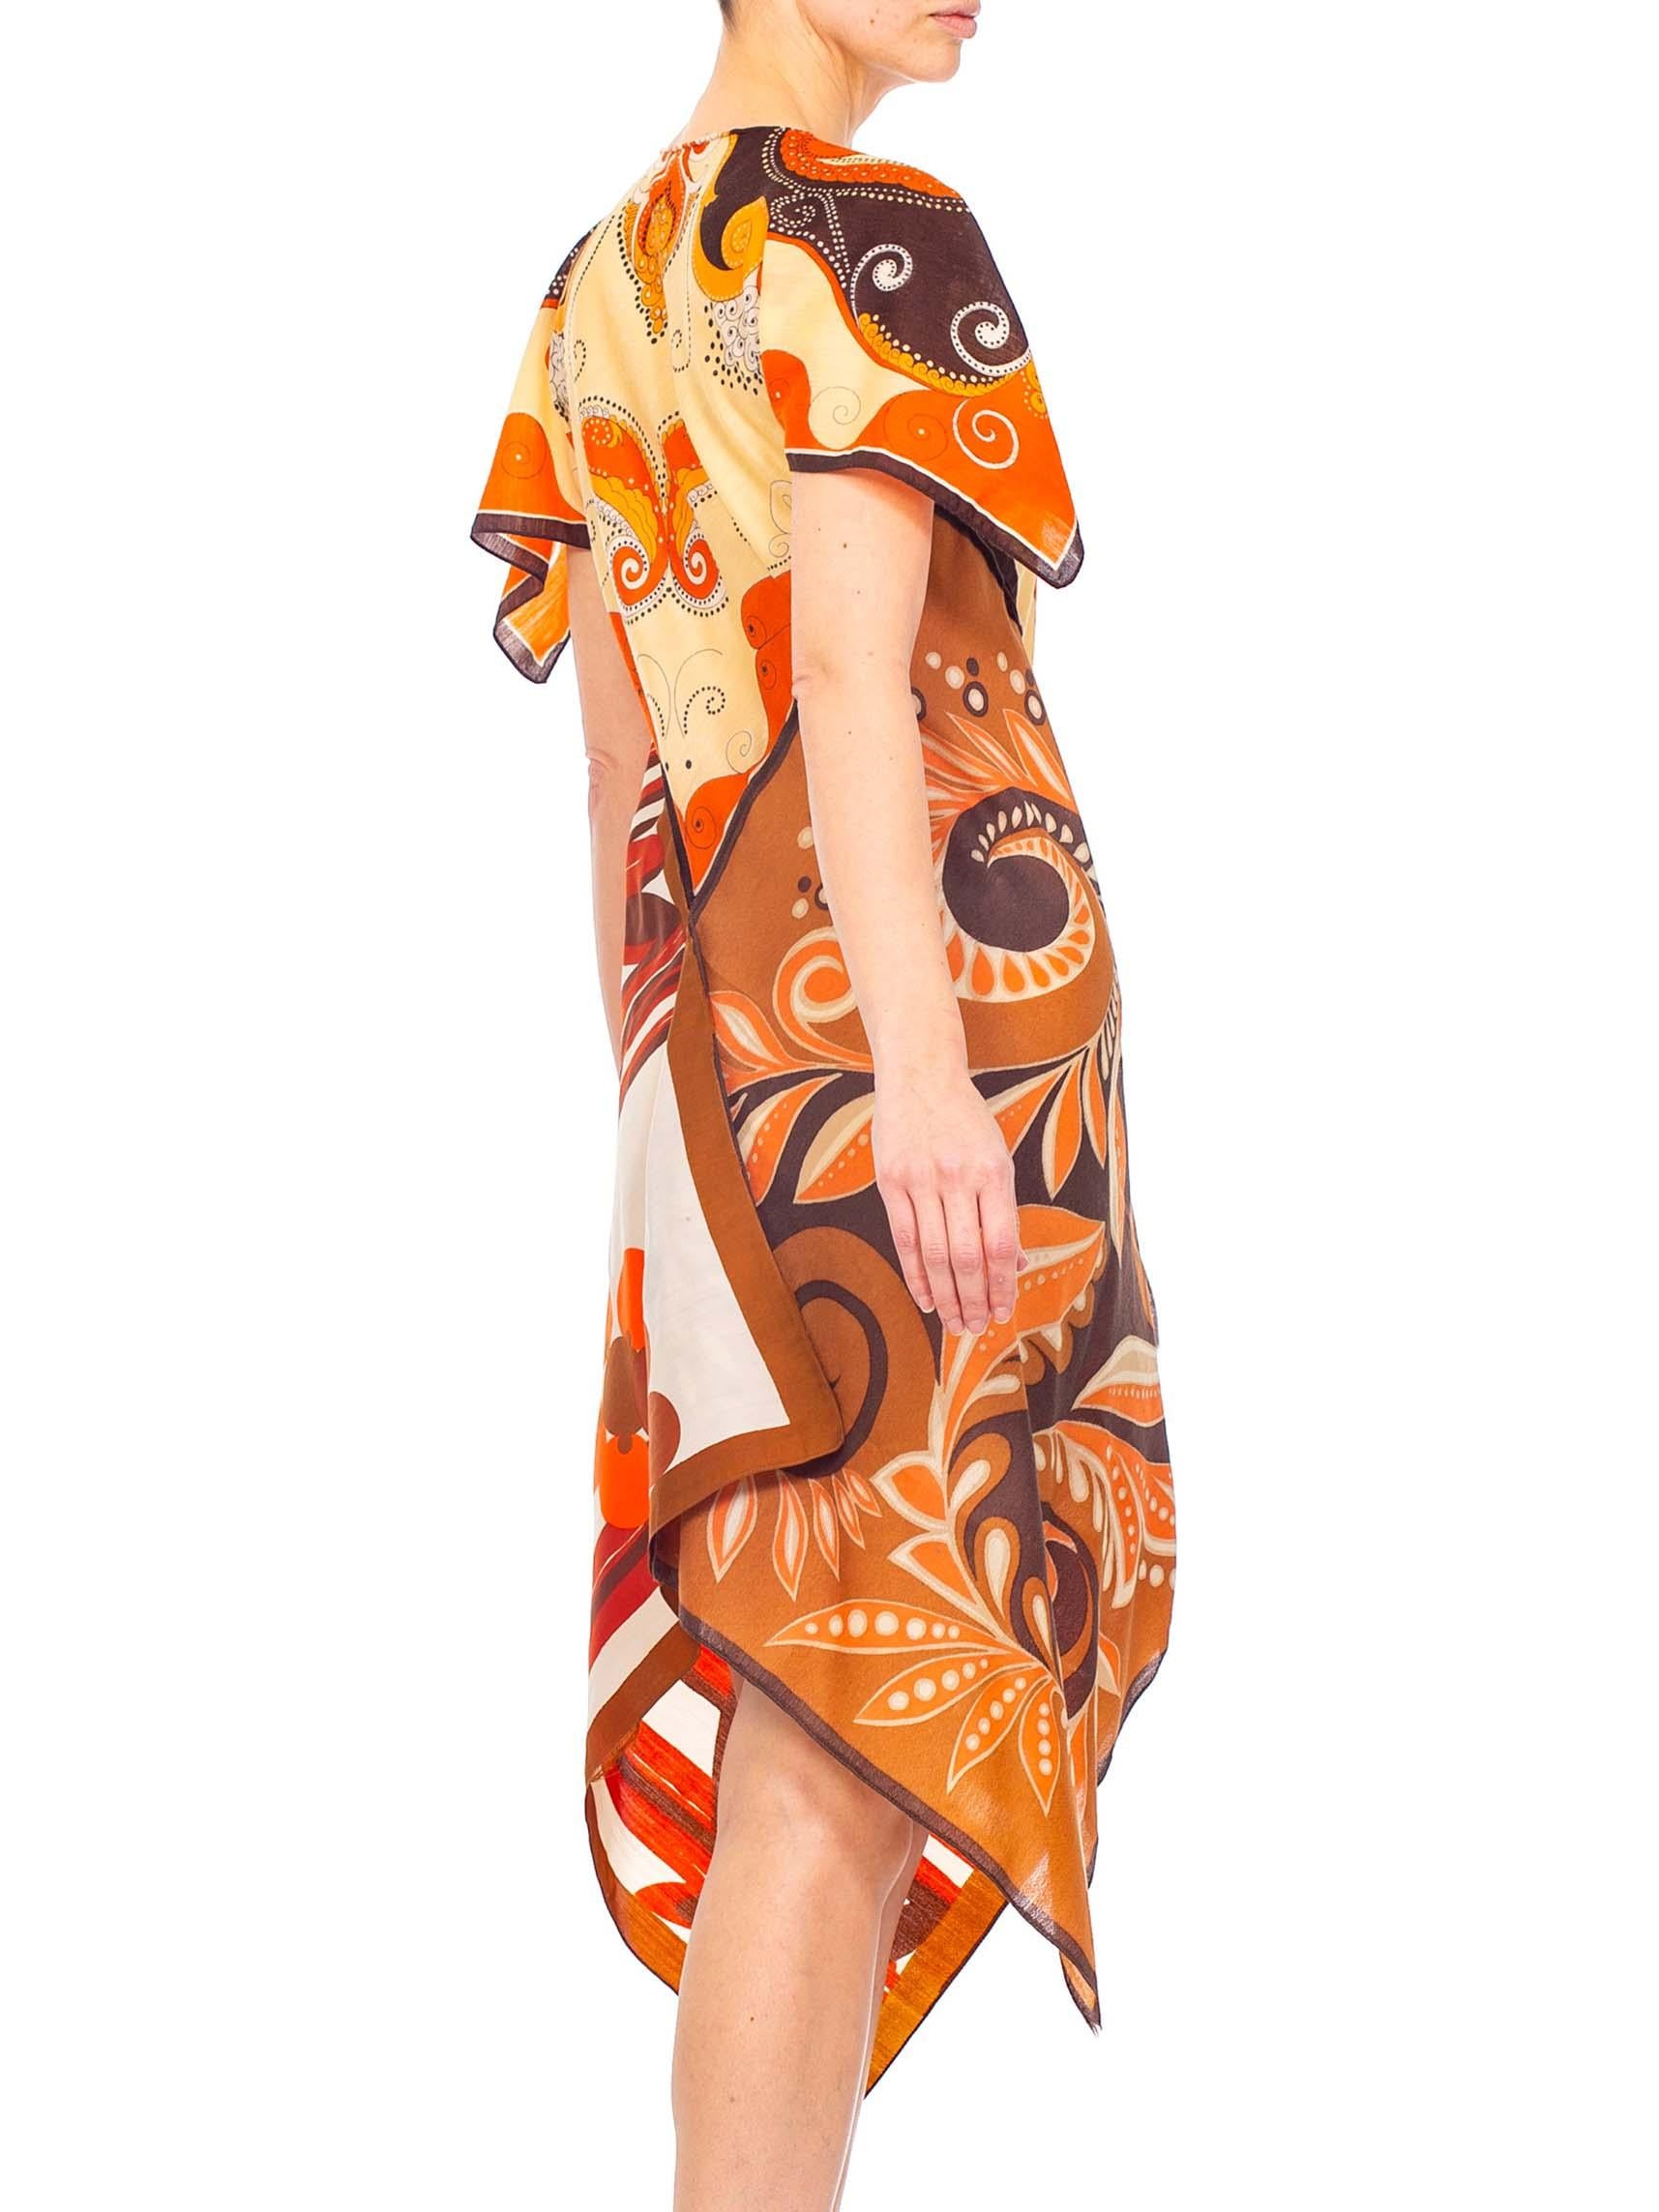 Women's MORPHEW COLLECTION Brown & Orange Polyester Psychedelic Print Scarf Kaftan Dress For Sale